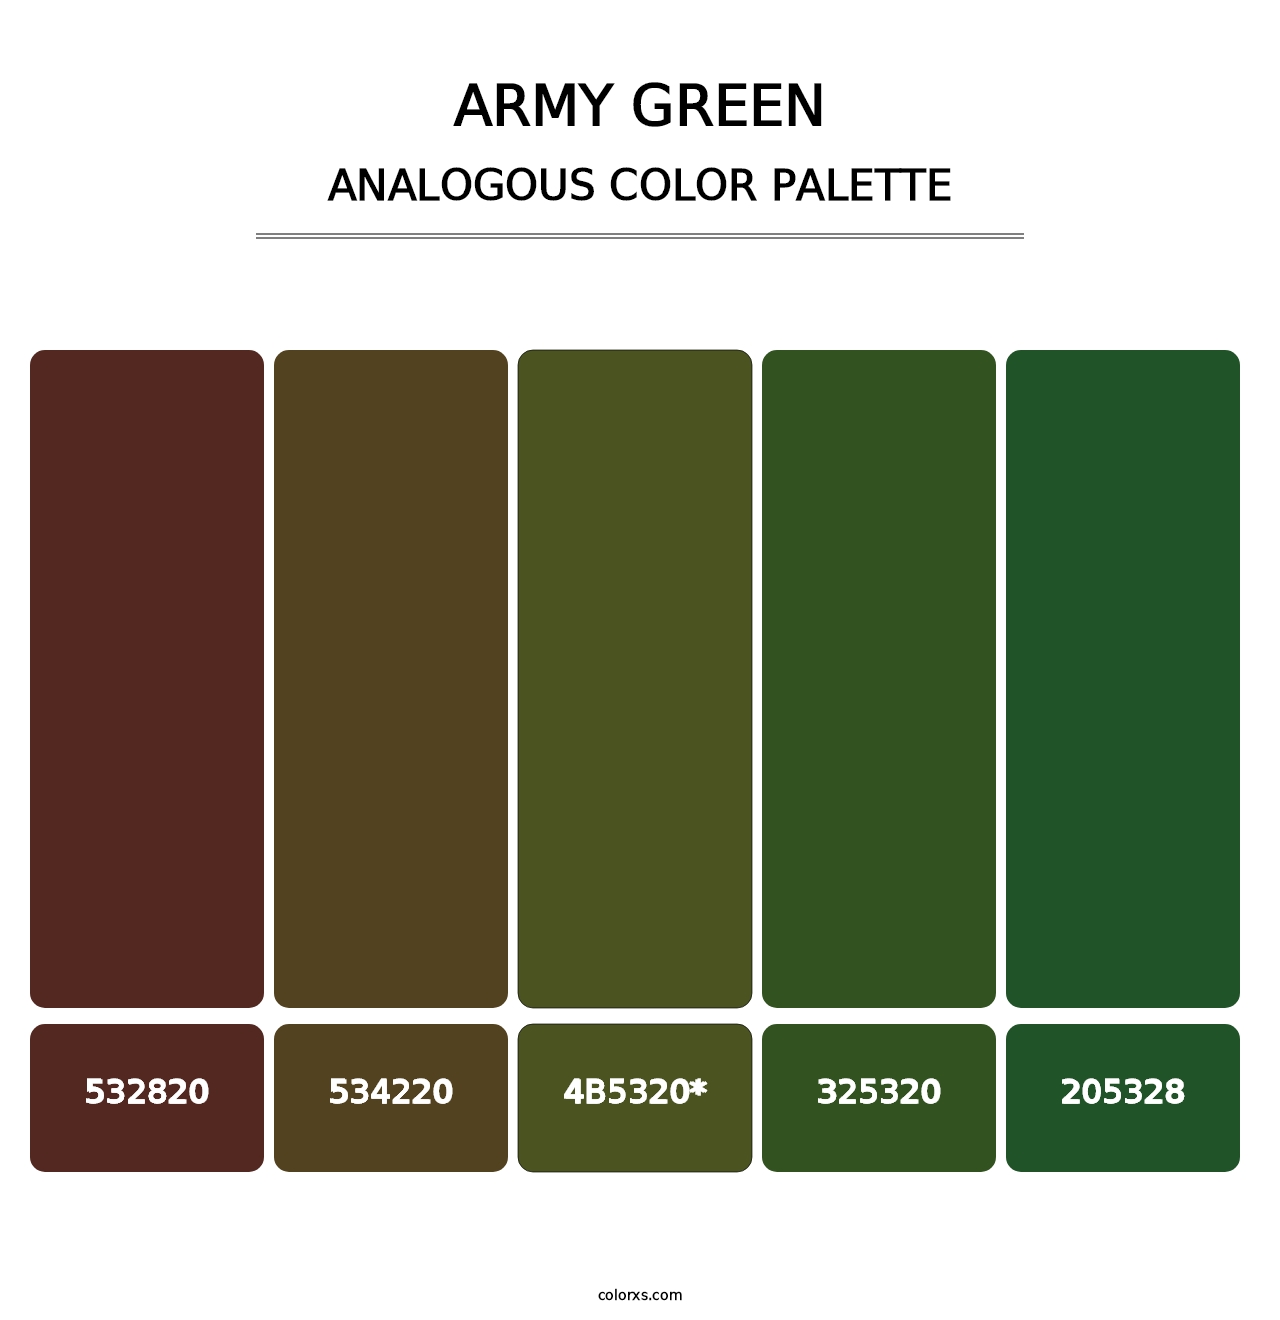 Army Green - Analogous Color Palette